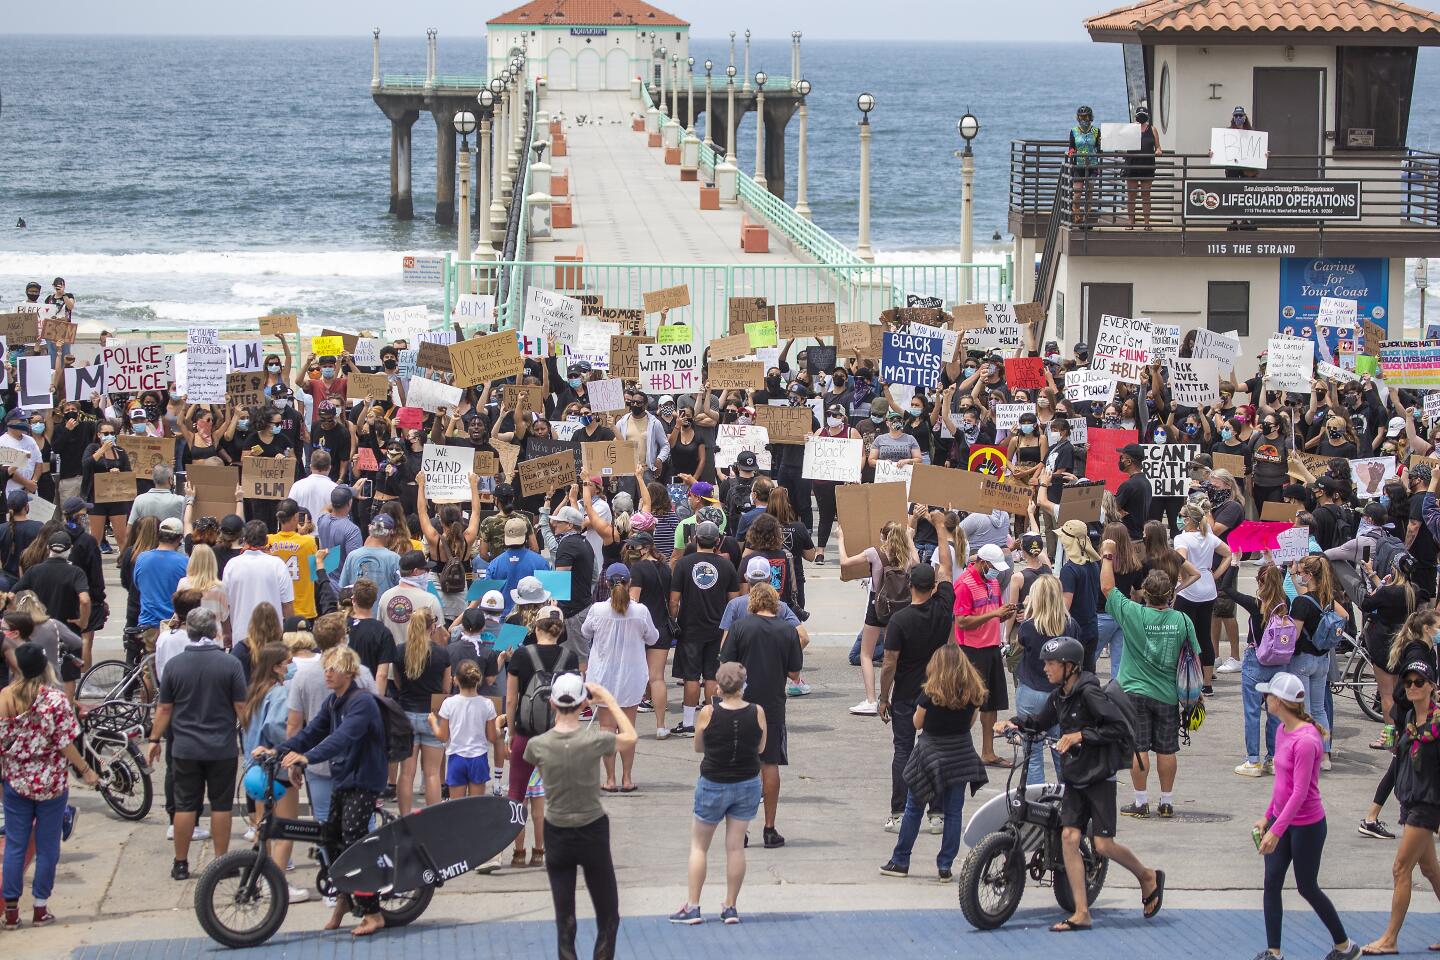 Several hundred protesters gather to demand justice for George Floyd at the Manhattan Beach Pier Plaza